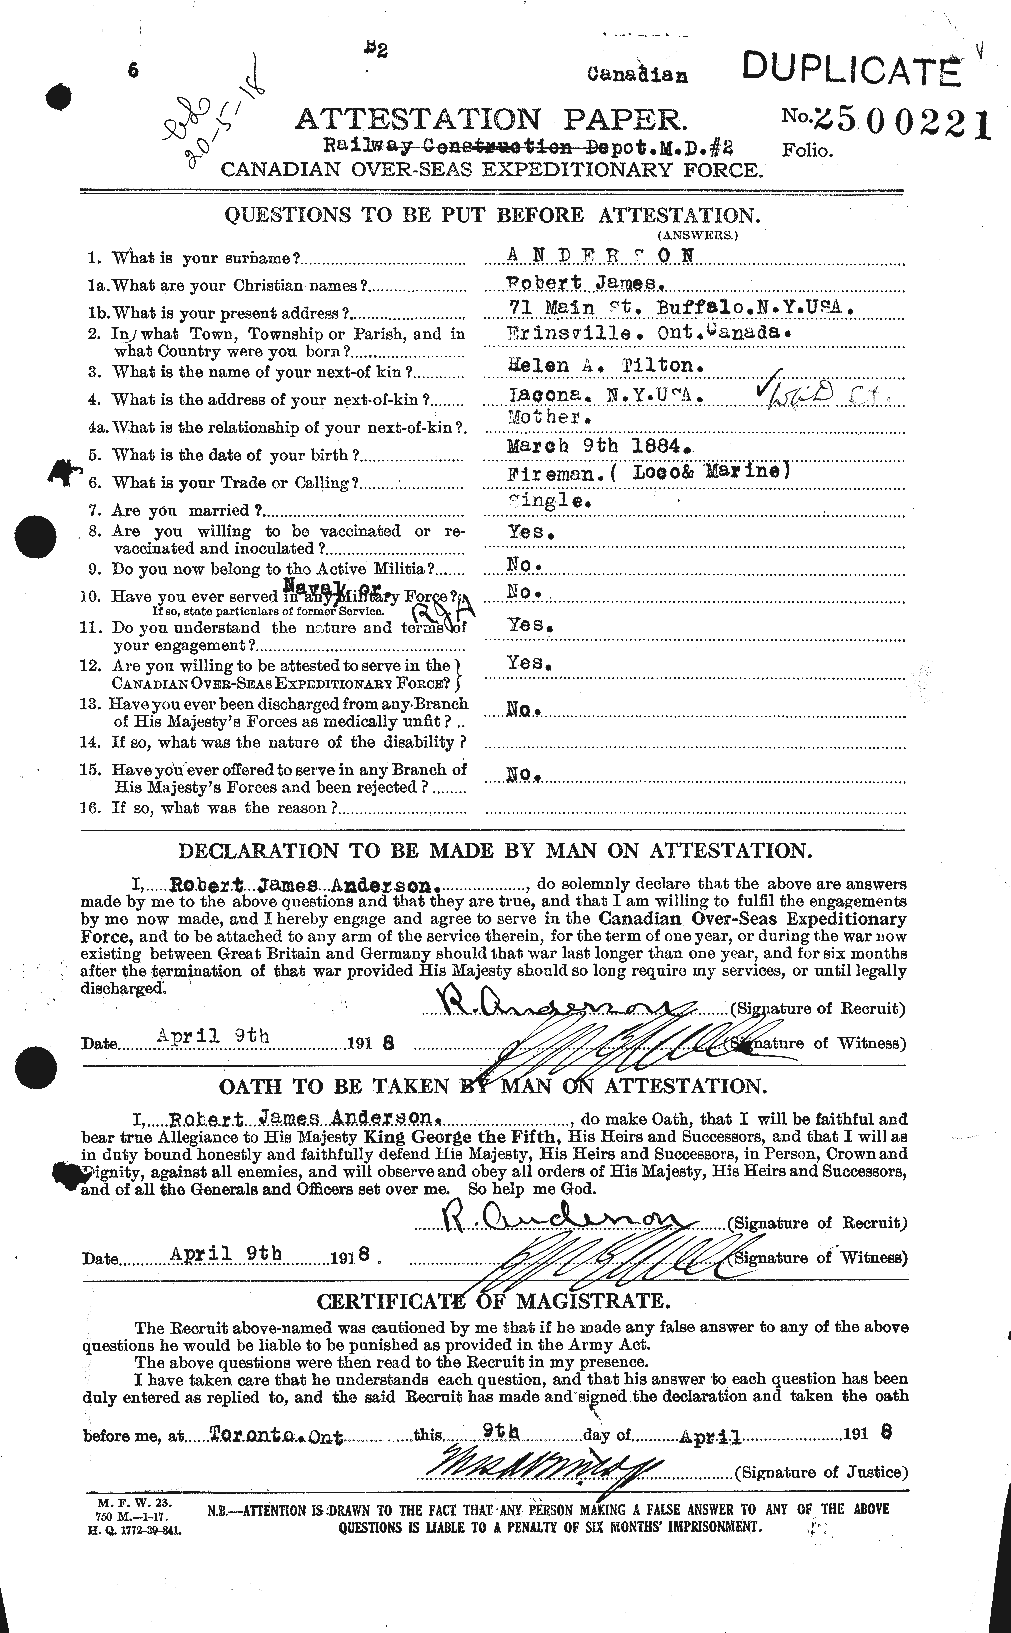 Personnel Records of the First World War - CEF 207242a